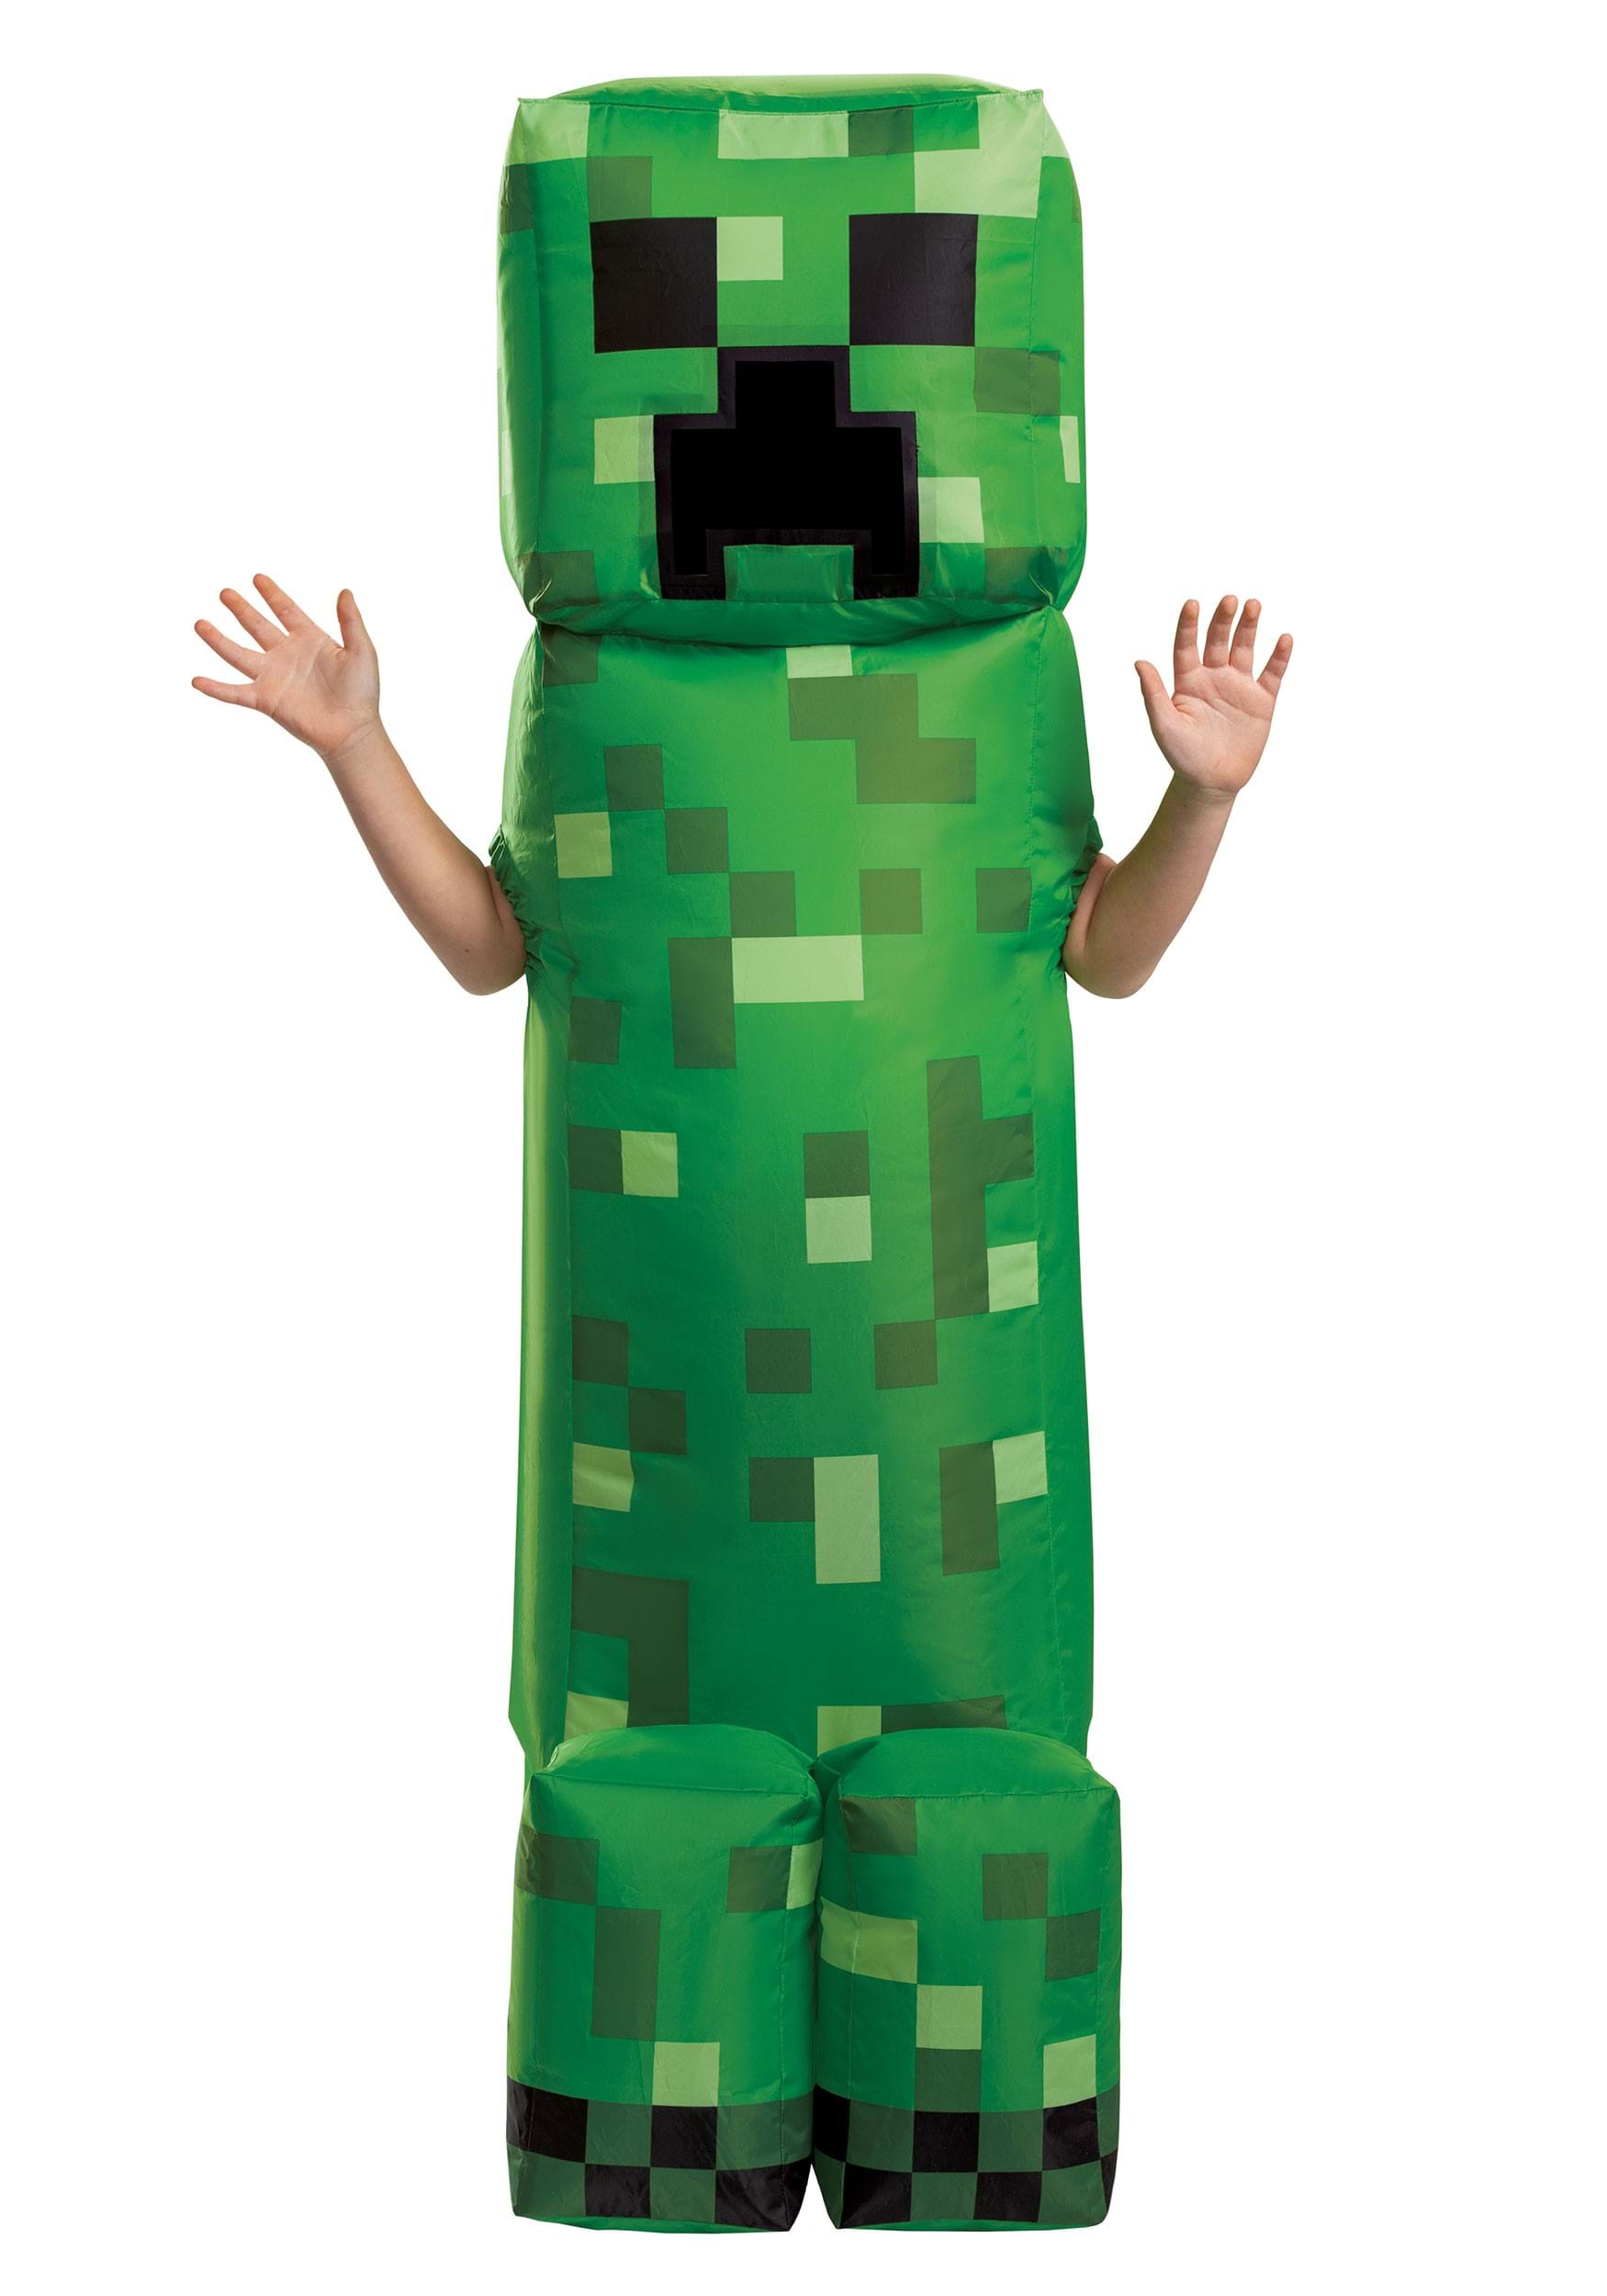 minecraft creeper in real life